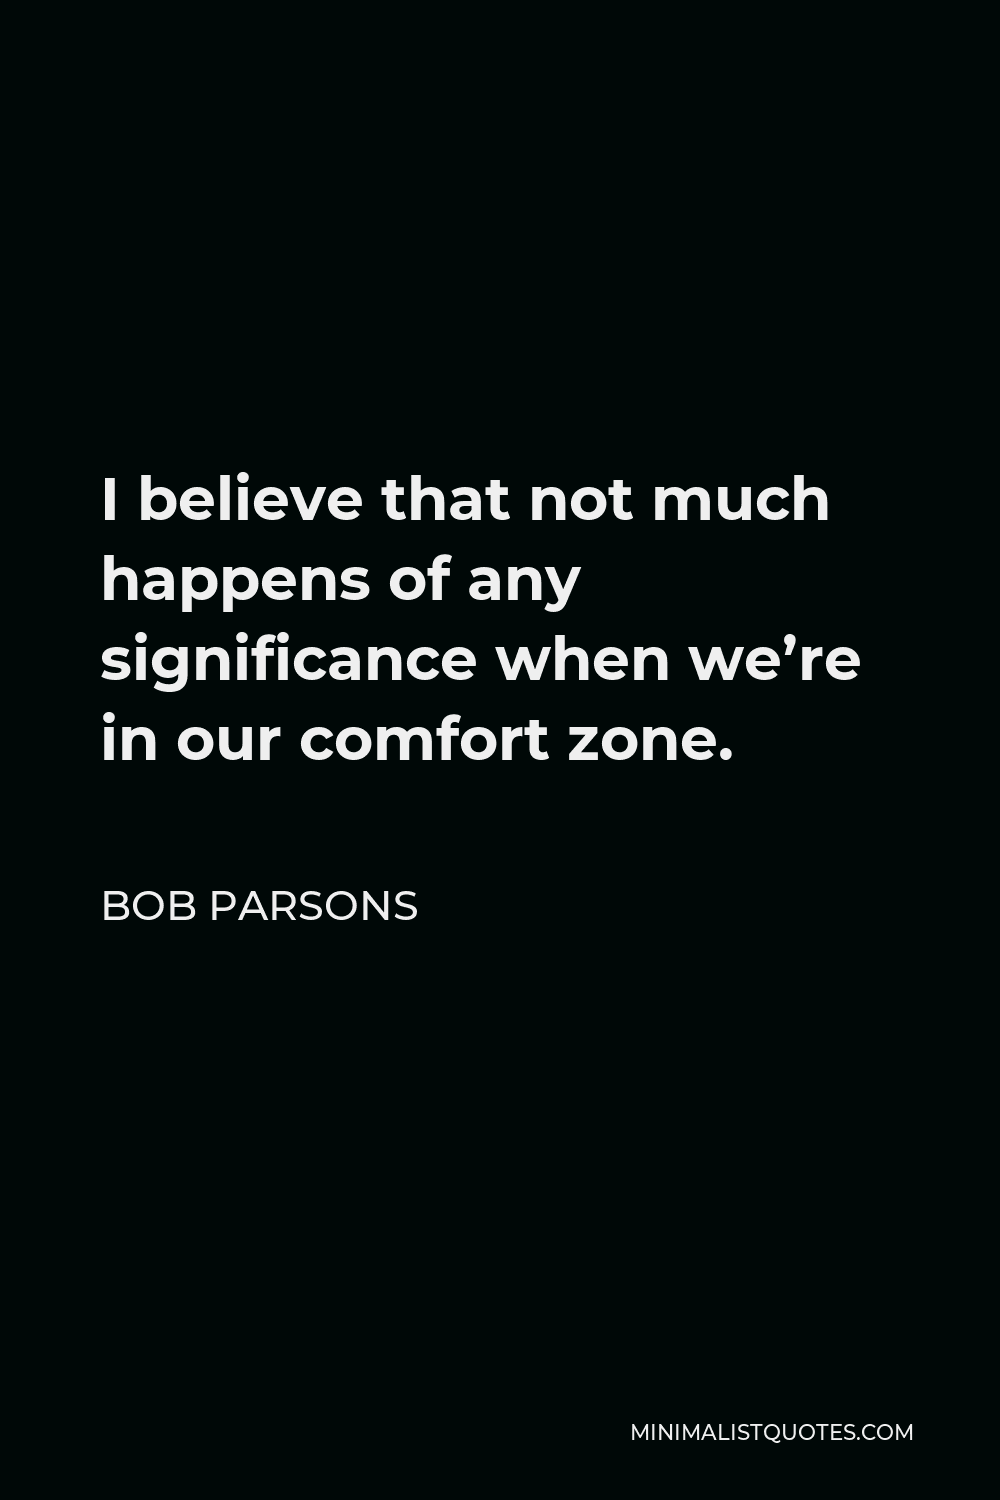 Bob Parsons Quote - I believe that not much happens of any significance when we’re in our comfort zone.